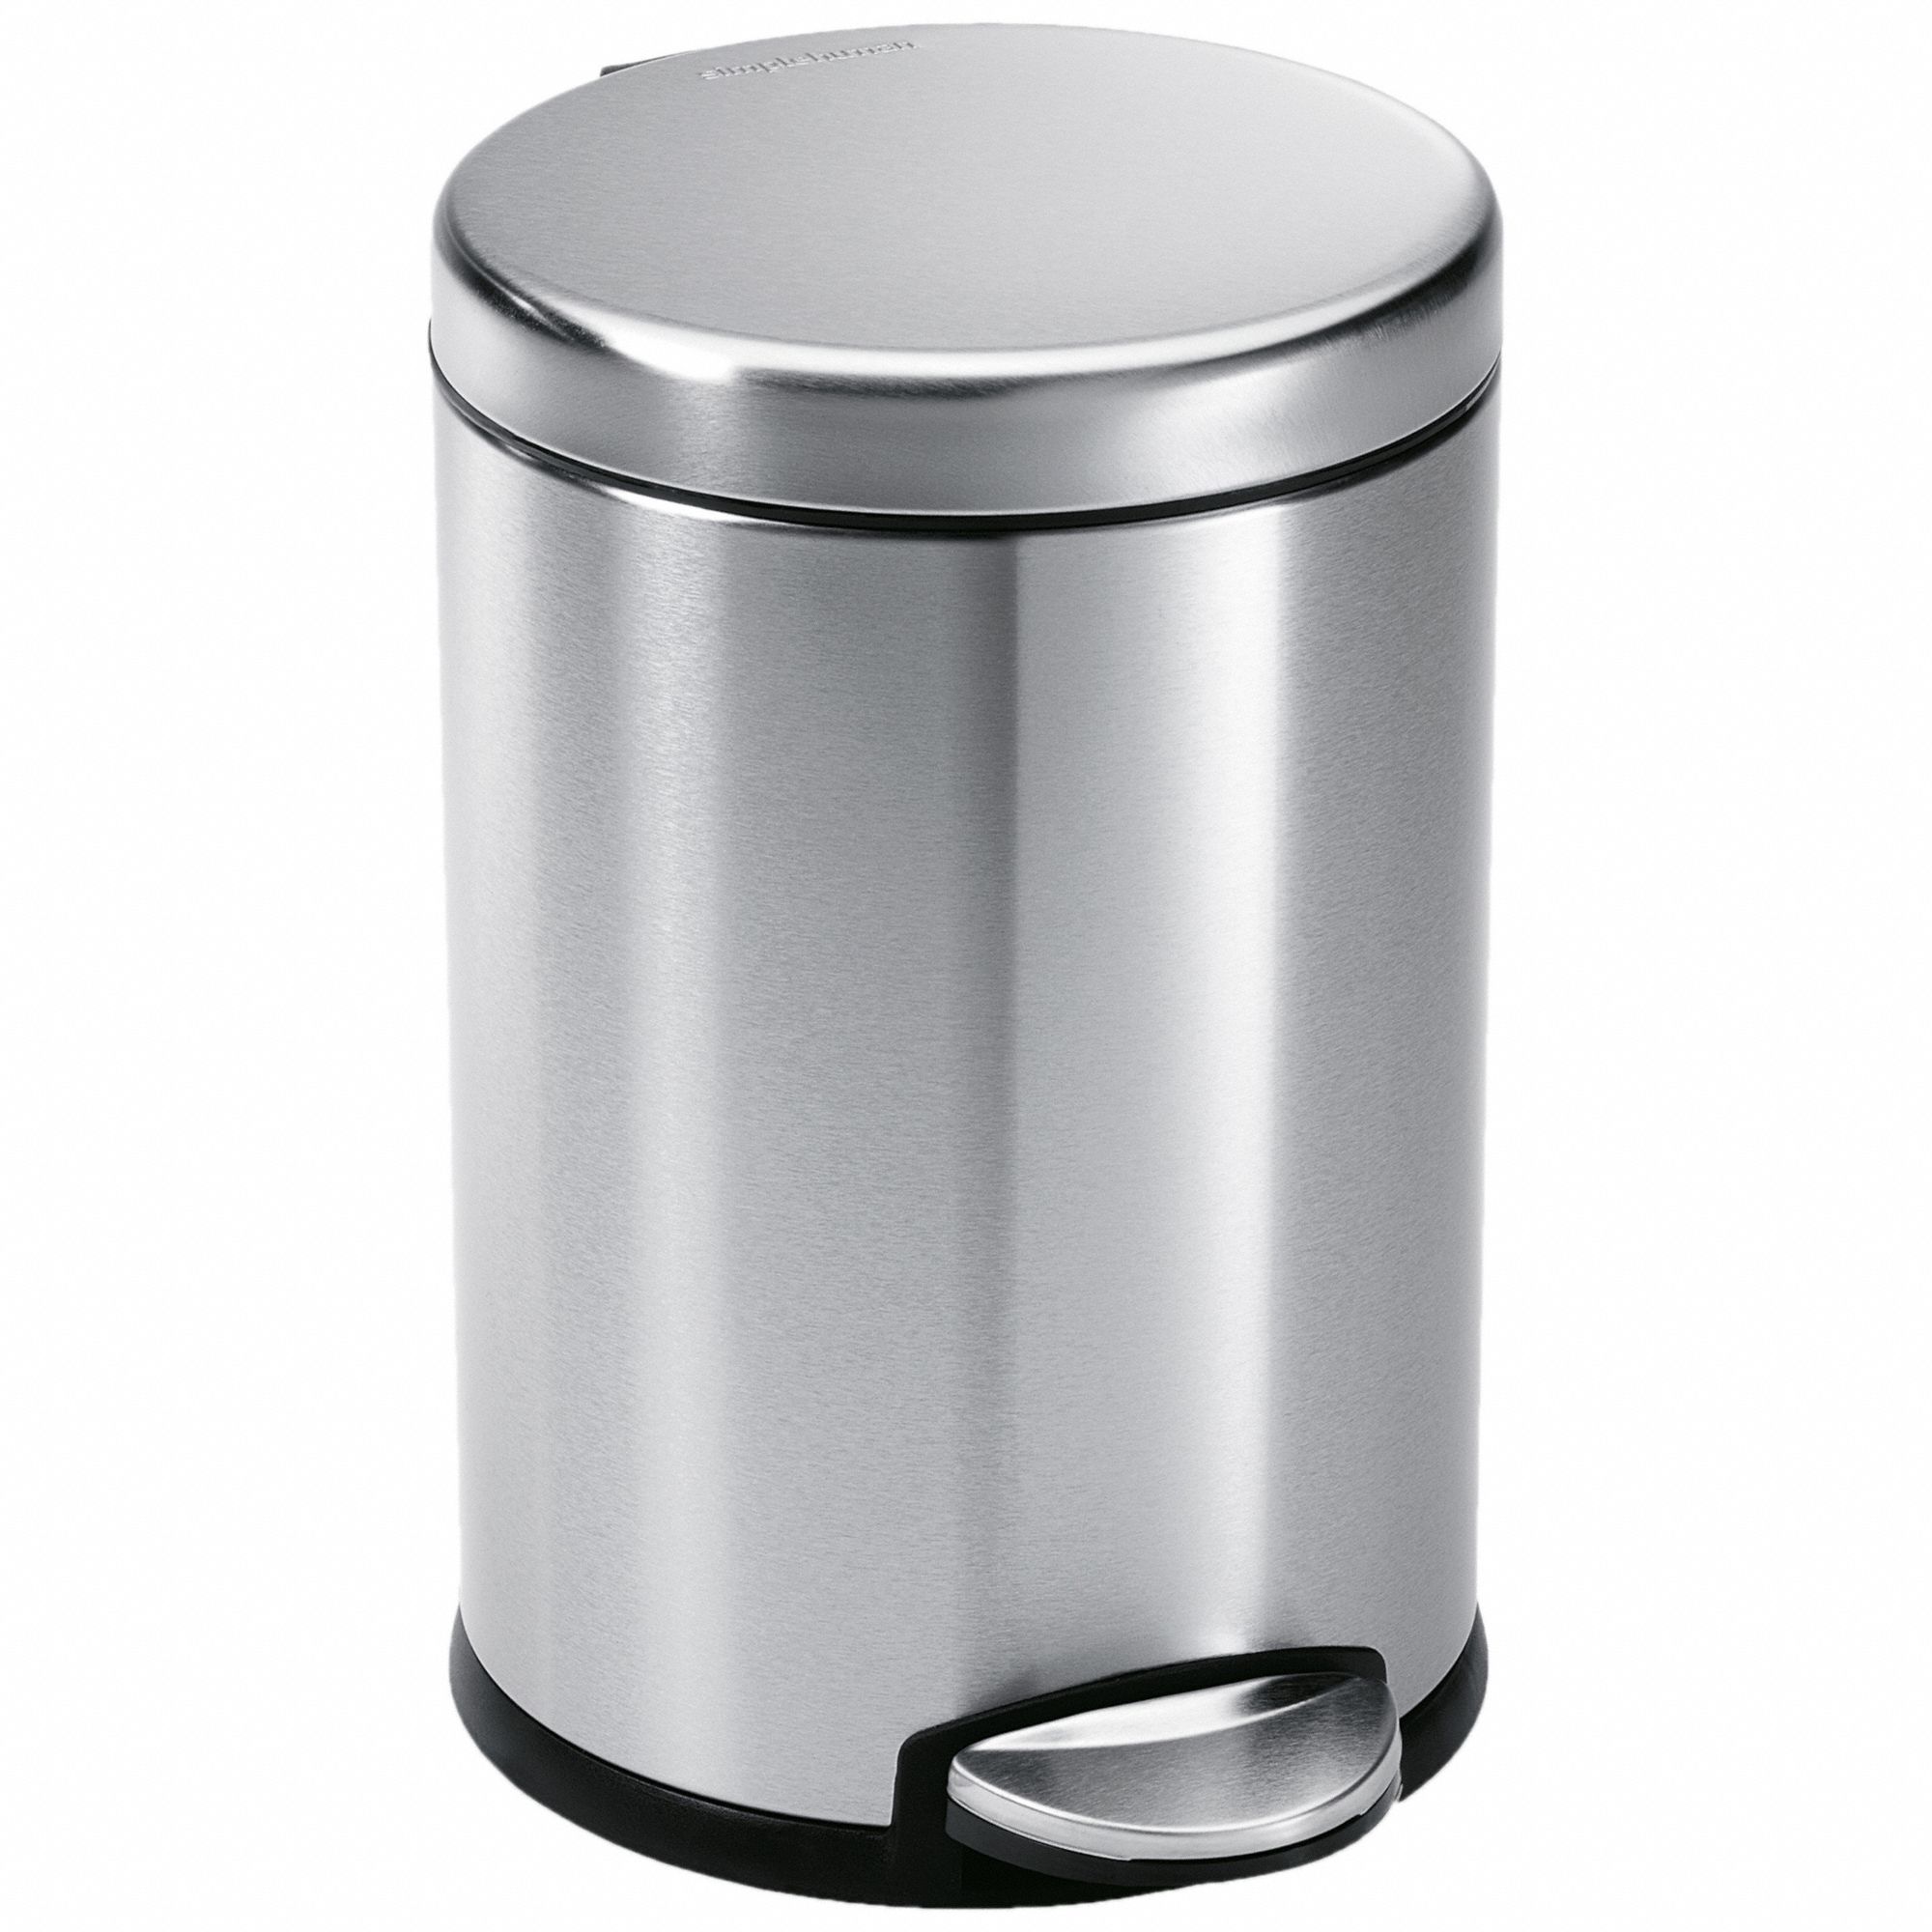 Step Can: Metal, Silver, 1 1/4 gal Capacity, 7 5/8 in Wd/Dia, 10 in Dp, 12 1/8 in Ht